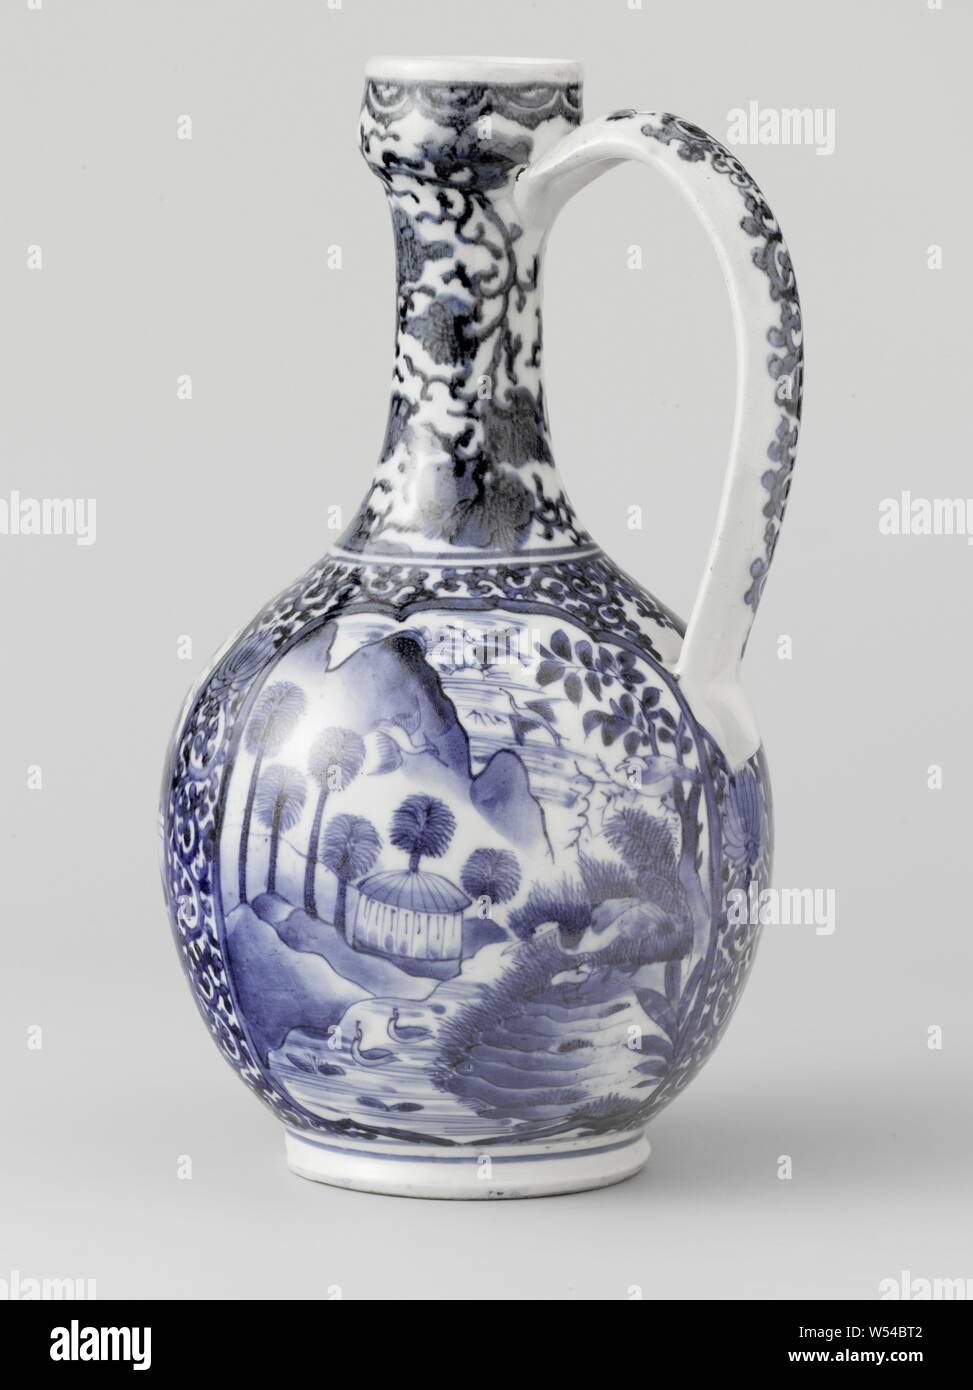 Ewer with landscapes in panels and floral scrolls, Porcelain jug with spherical body, c-shaped ear and small, triangular spout from the rim, painted in underglaze blue. The belly is covered with 'karakusa' tendrils with three scalloped cartouches in it. The middle catouche with two men in a landscape, one with a parasol and a fan, the other with a closed parasol and a dog. To the left of this is a cartouche with cranes in a landscape with trees and rocks. The third cartouche with different birds in a landscape with a pavilion, mountains and a pond. The neck and the ear with flower vines. A Stock Photo